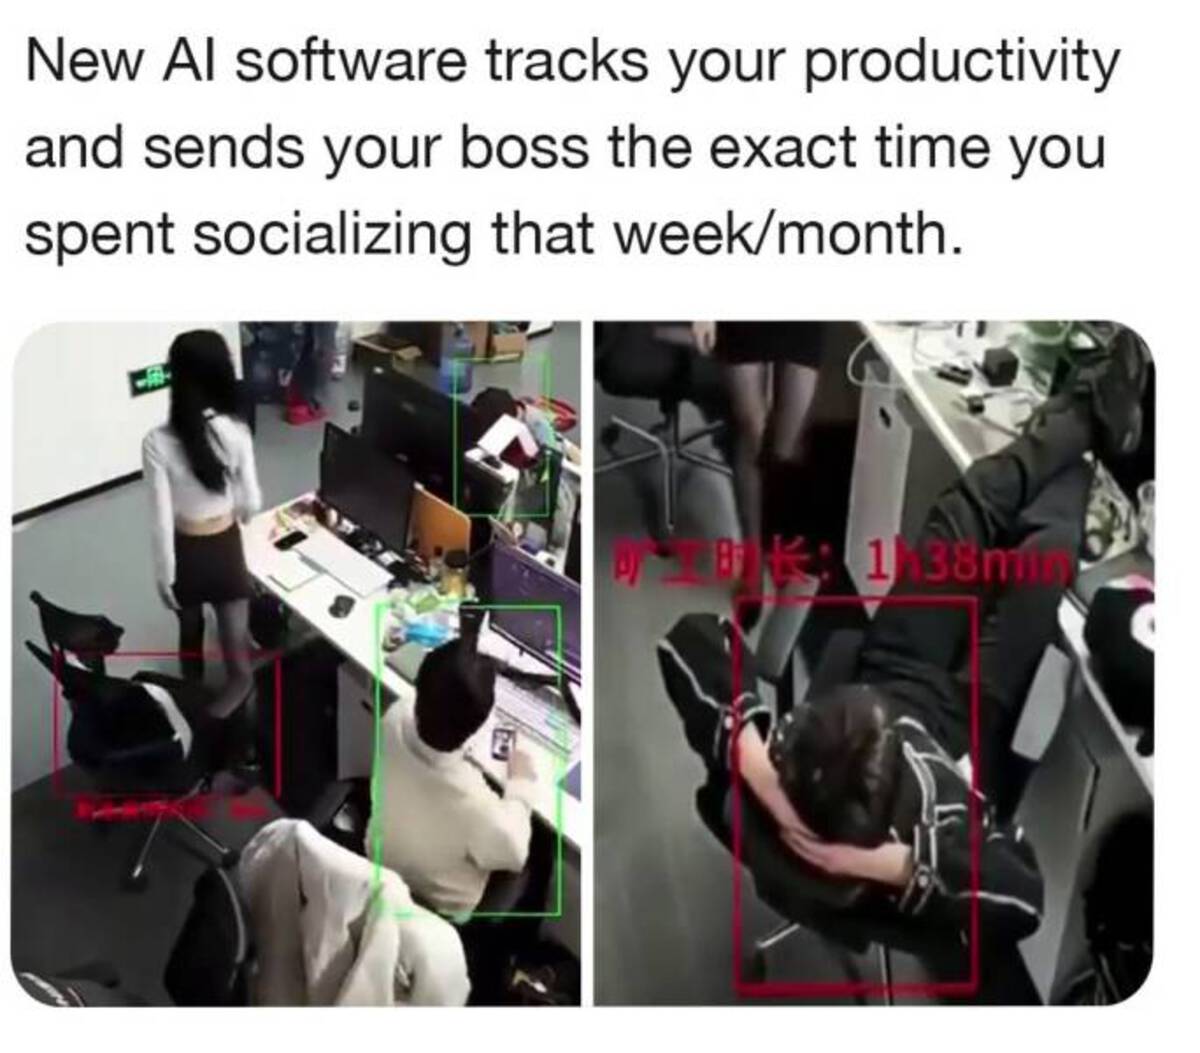 Artificial intelligence - New Al software tracks your productivity and sends your boss the exact time you spent socializing that weekmonth. B 138mm